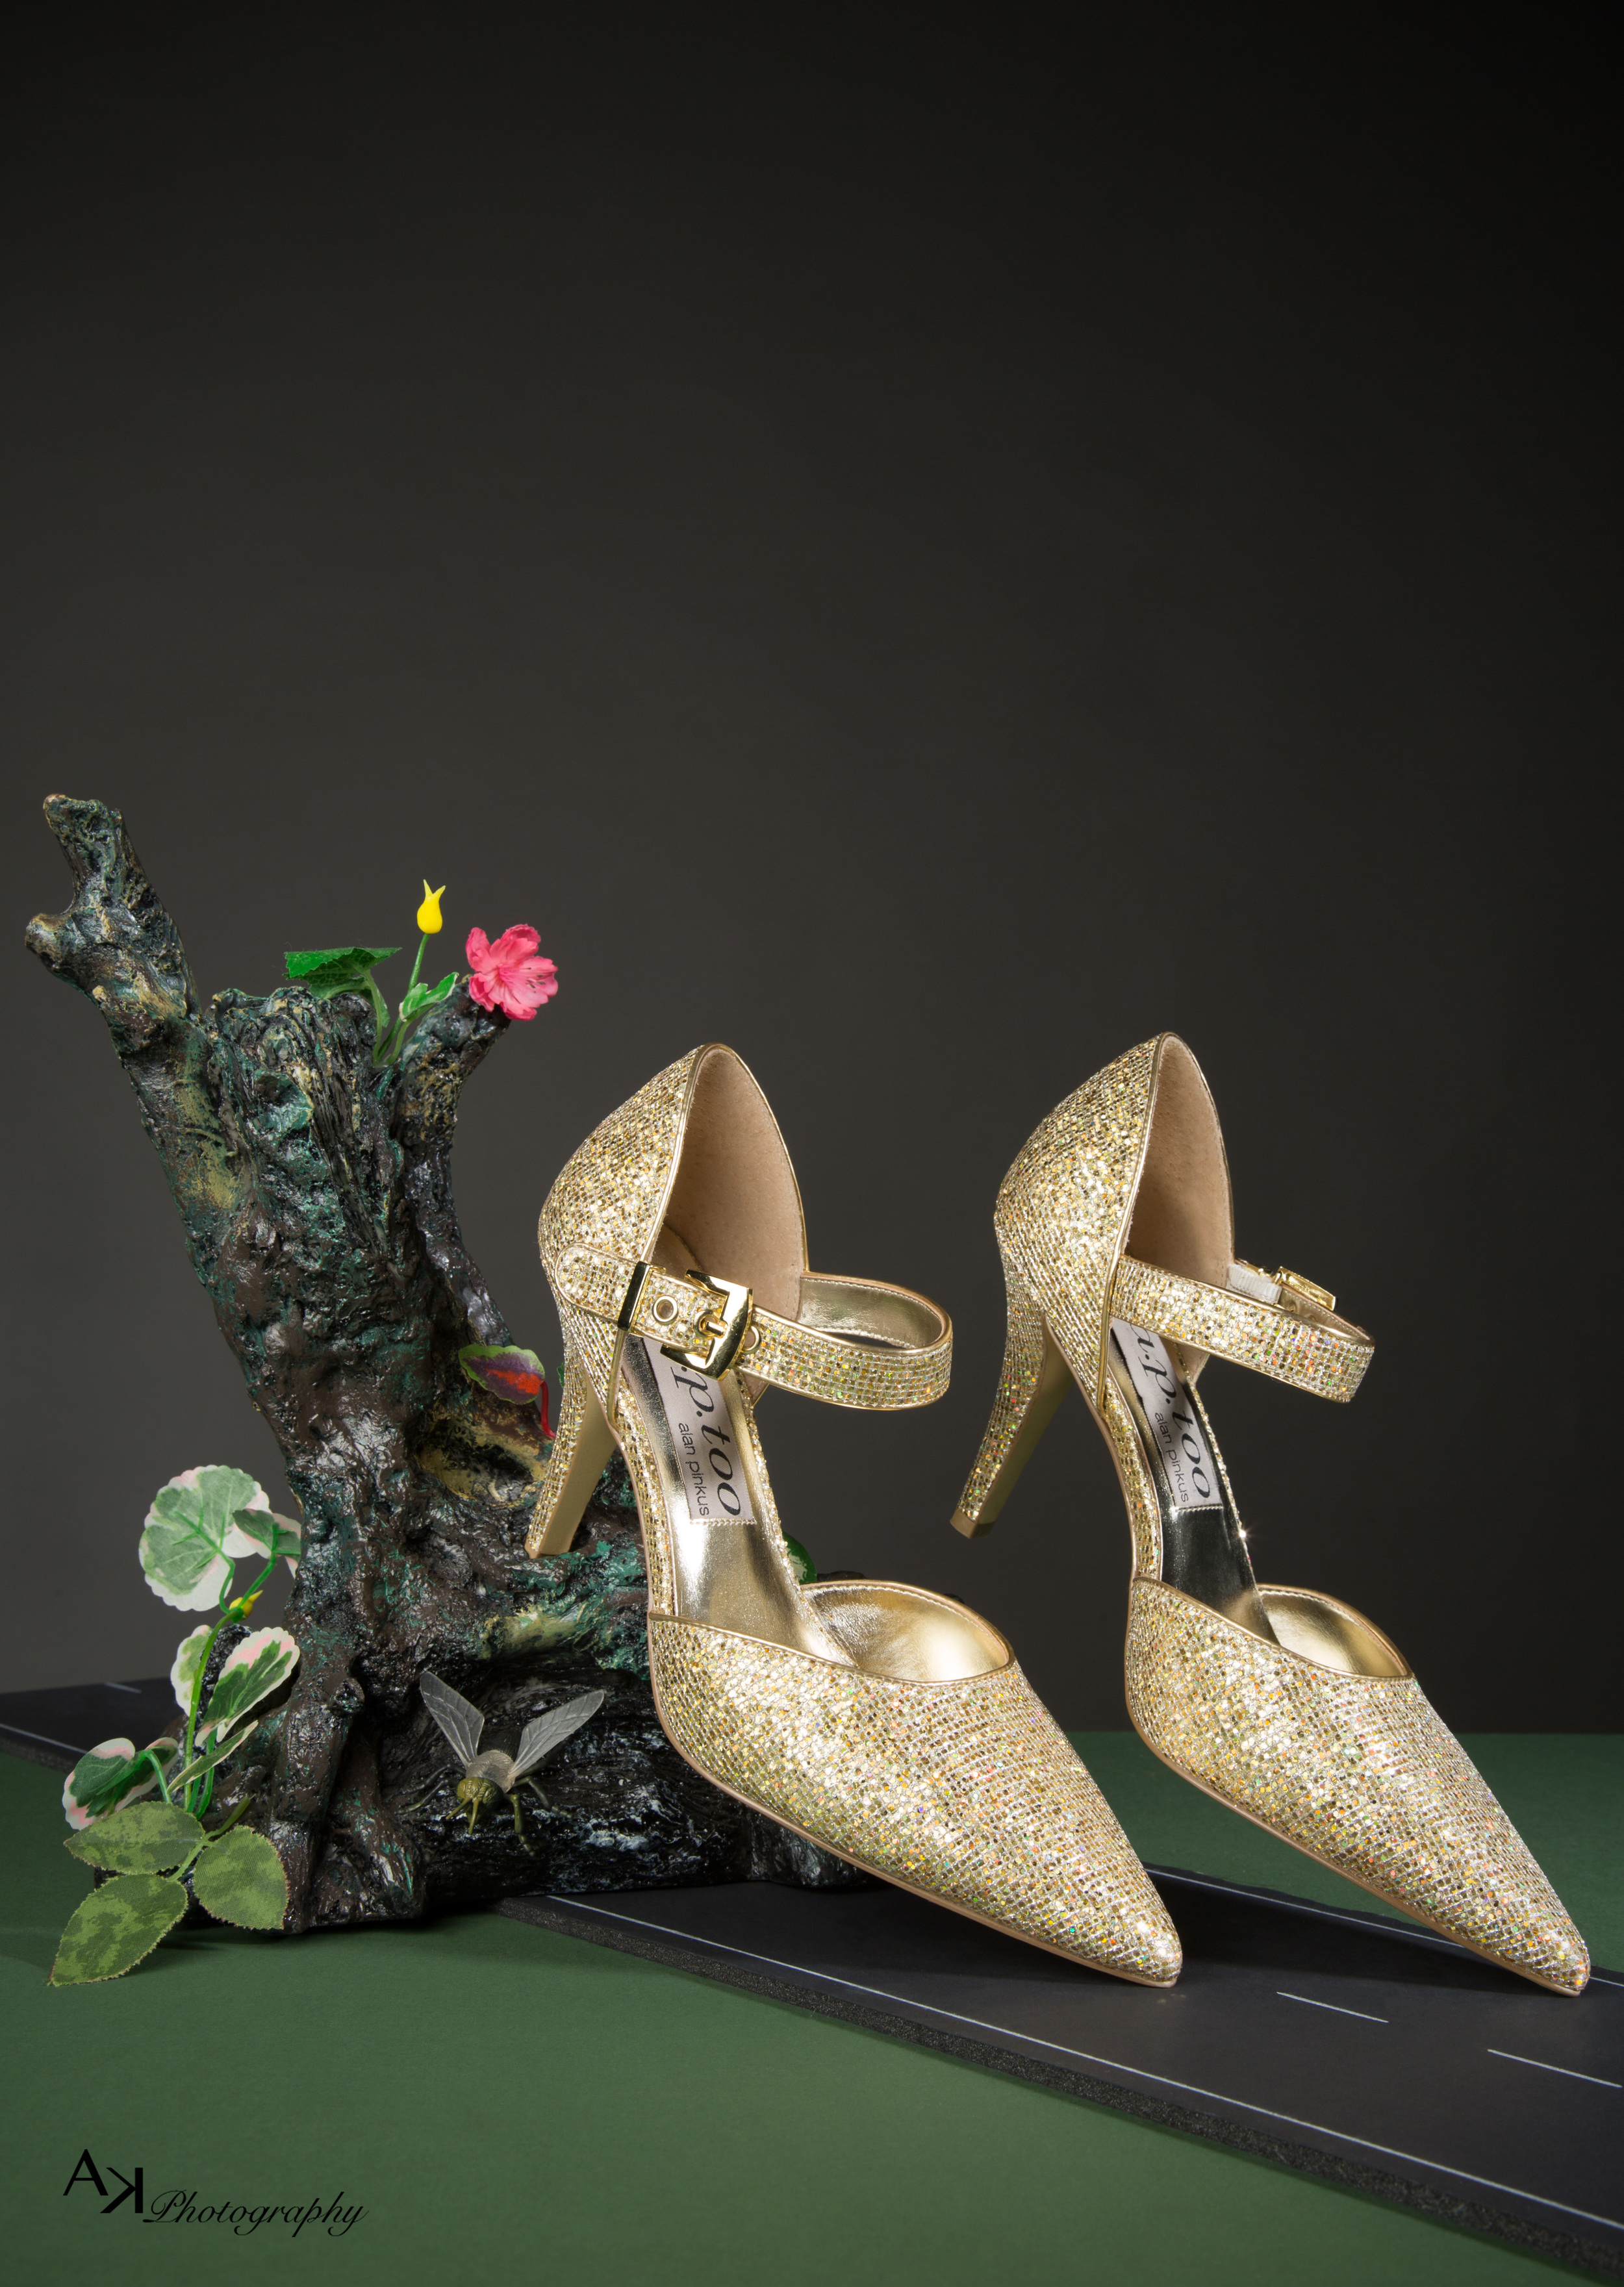  Luxury Shoe Campaign: "Take Me Where I'm Going" #3 Fantasy Forrest Style 